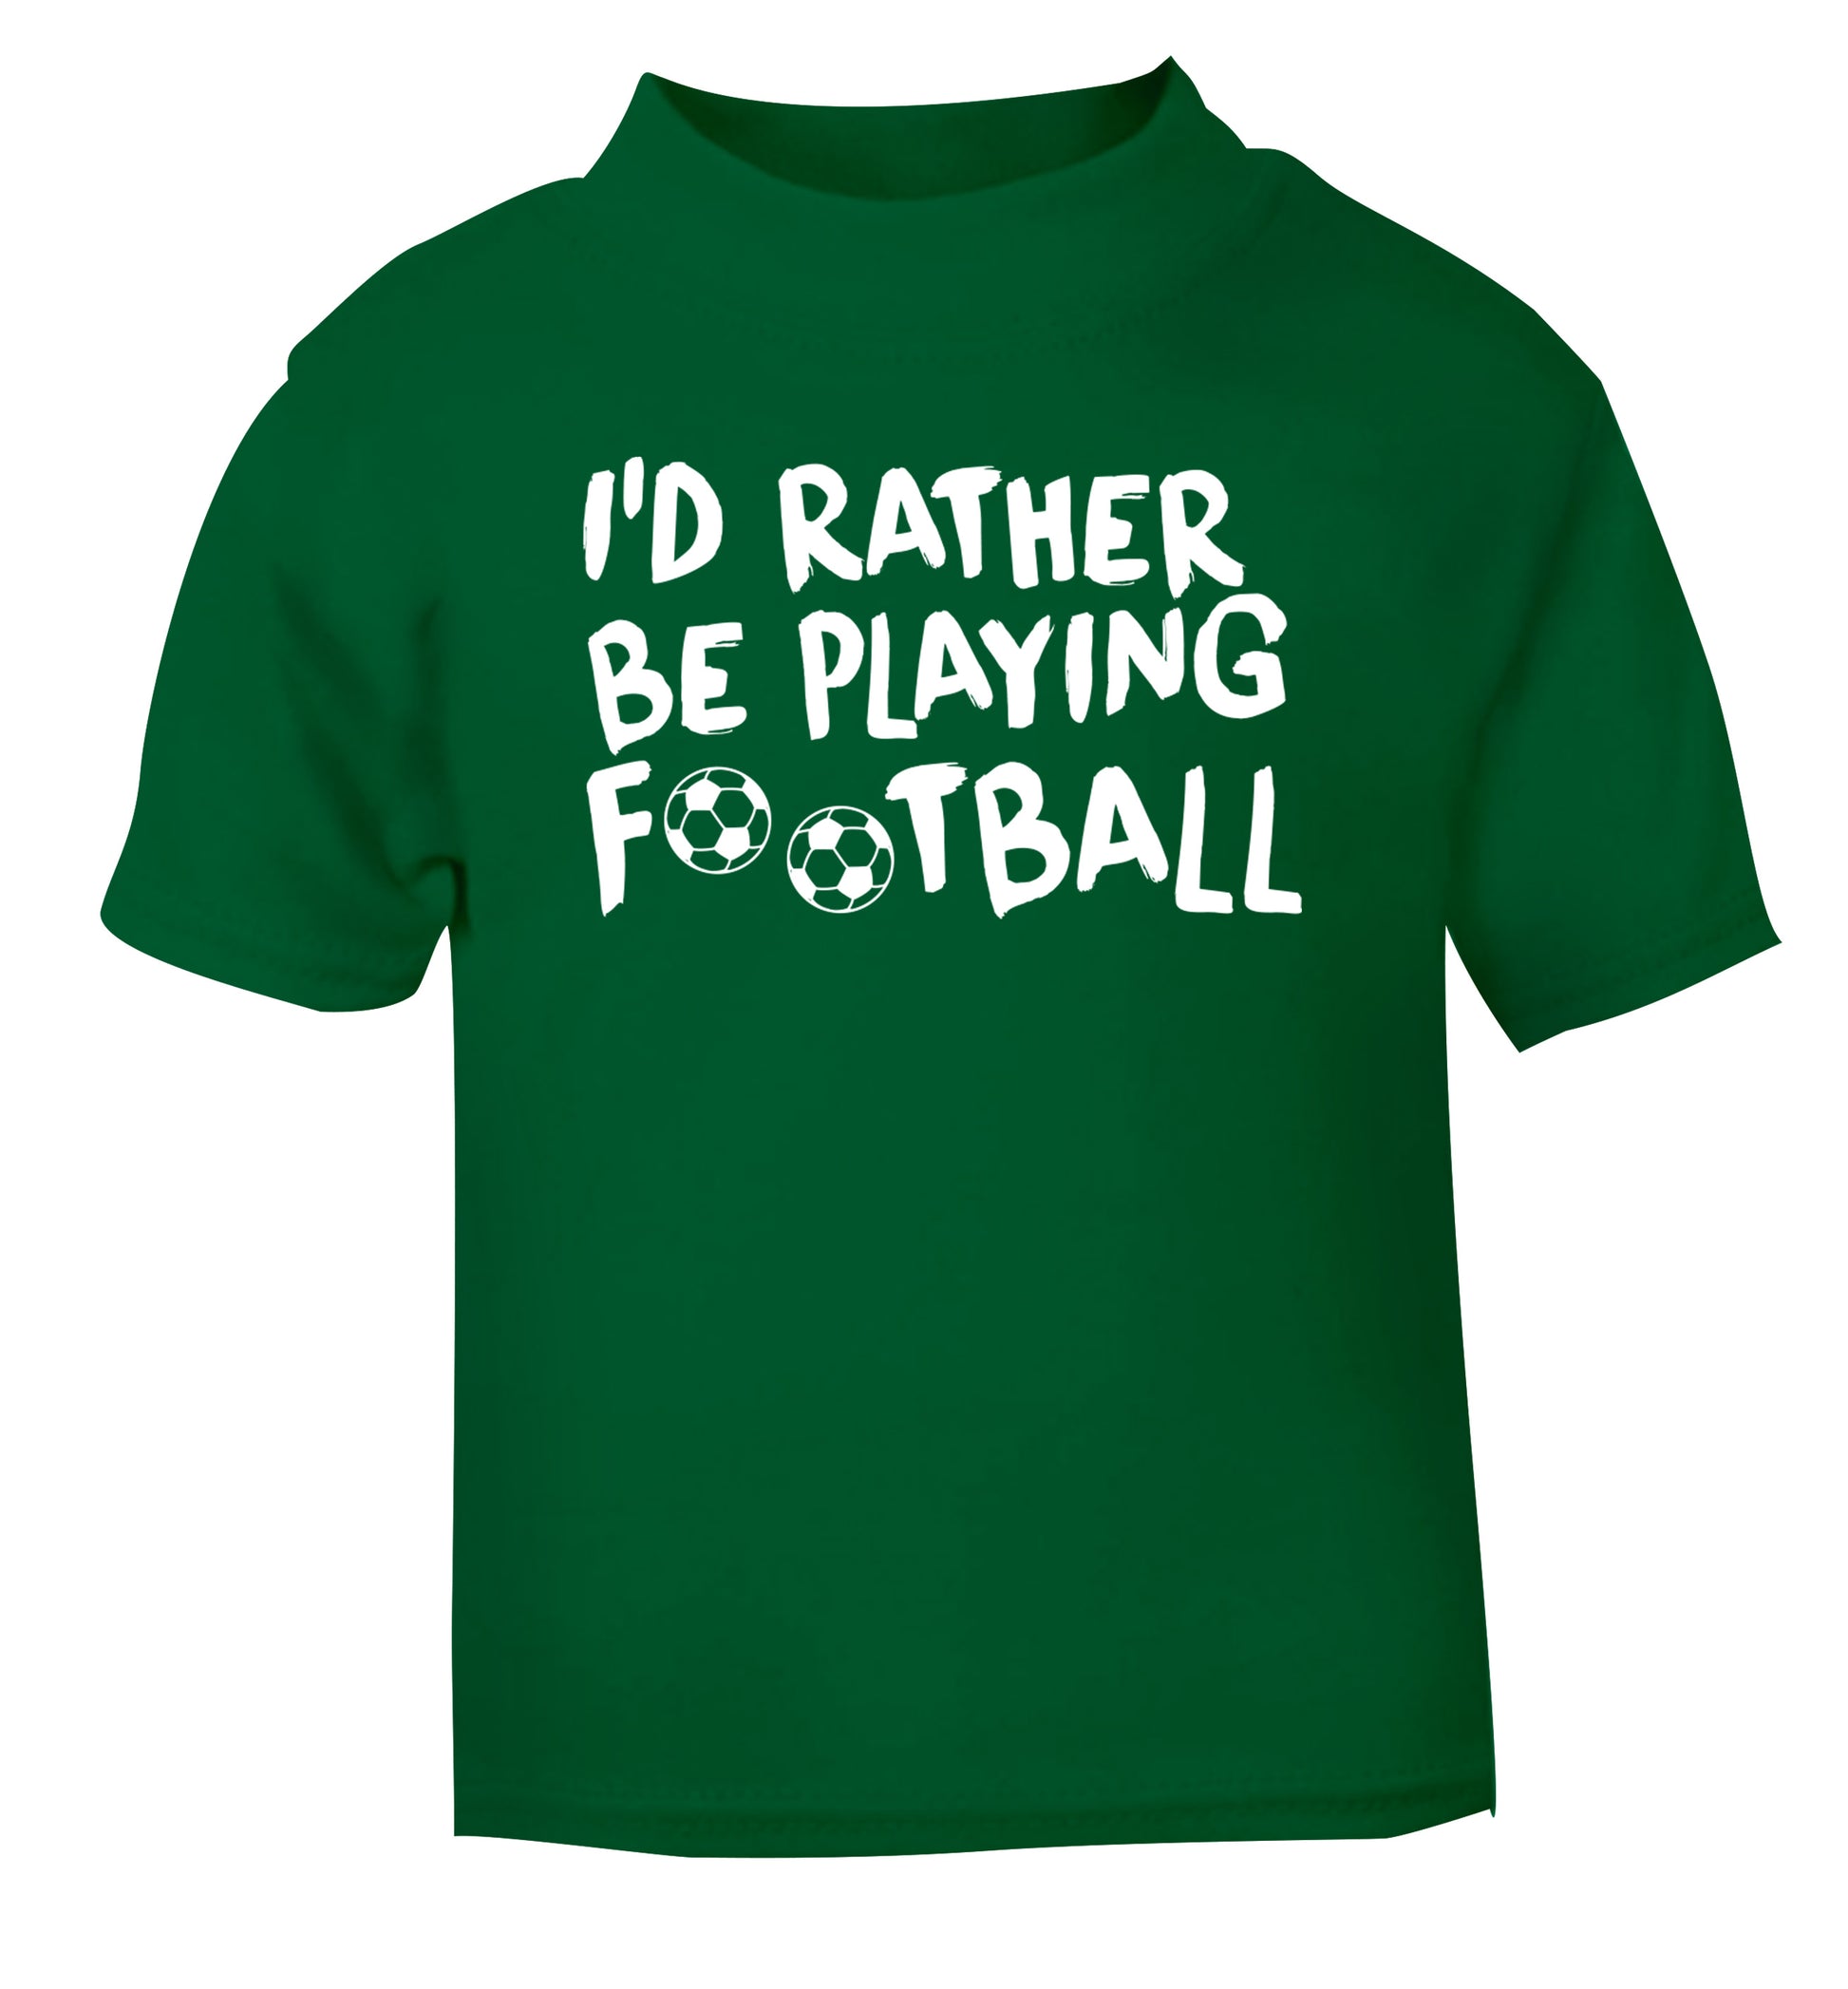 I'd rather be playing football green Baby Toddler Tshirt 2 Years